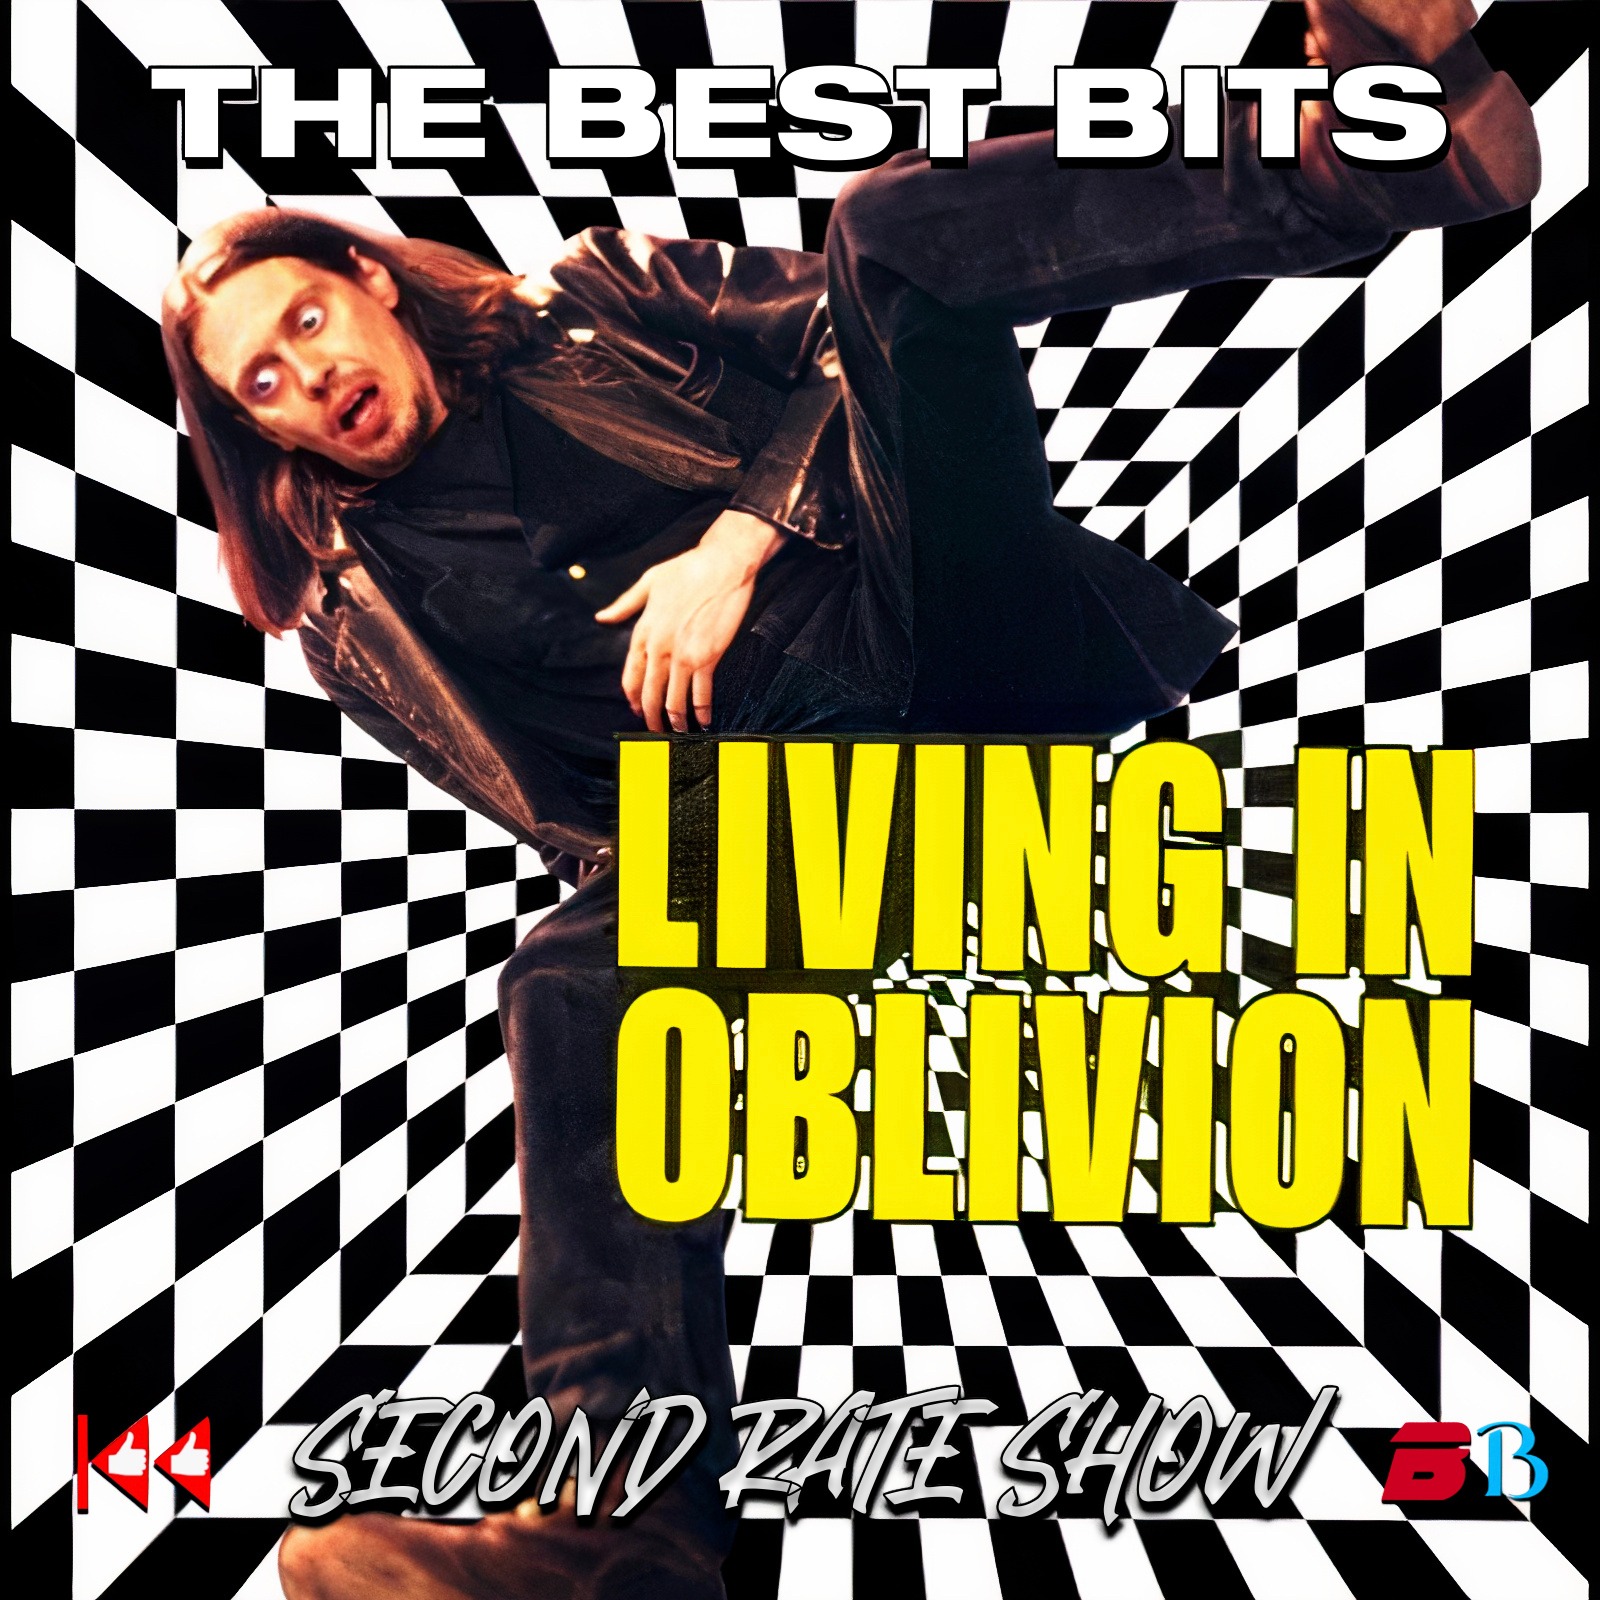 Second Rate Review: Living in Oblivion (1995)